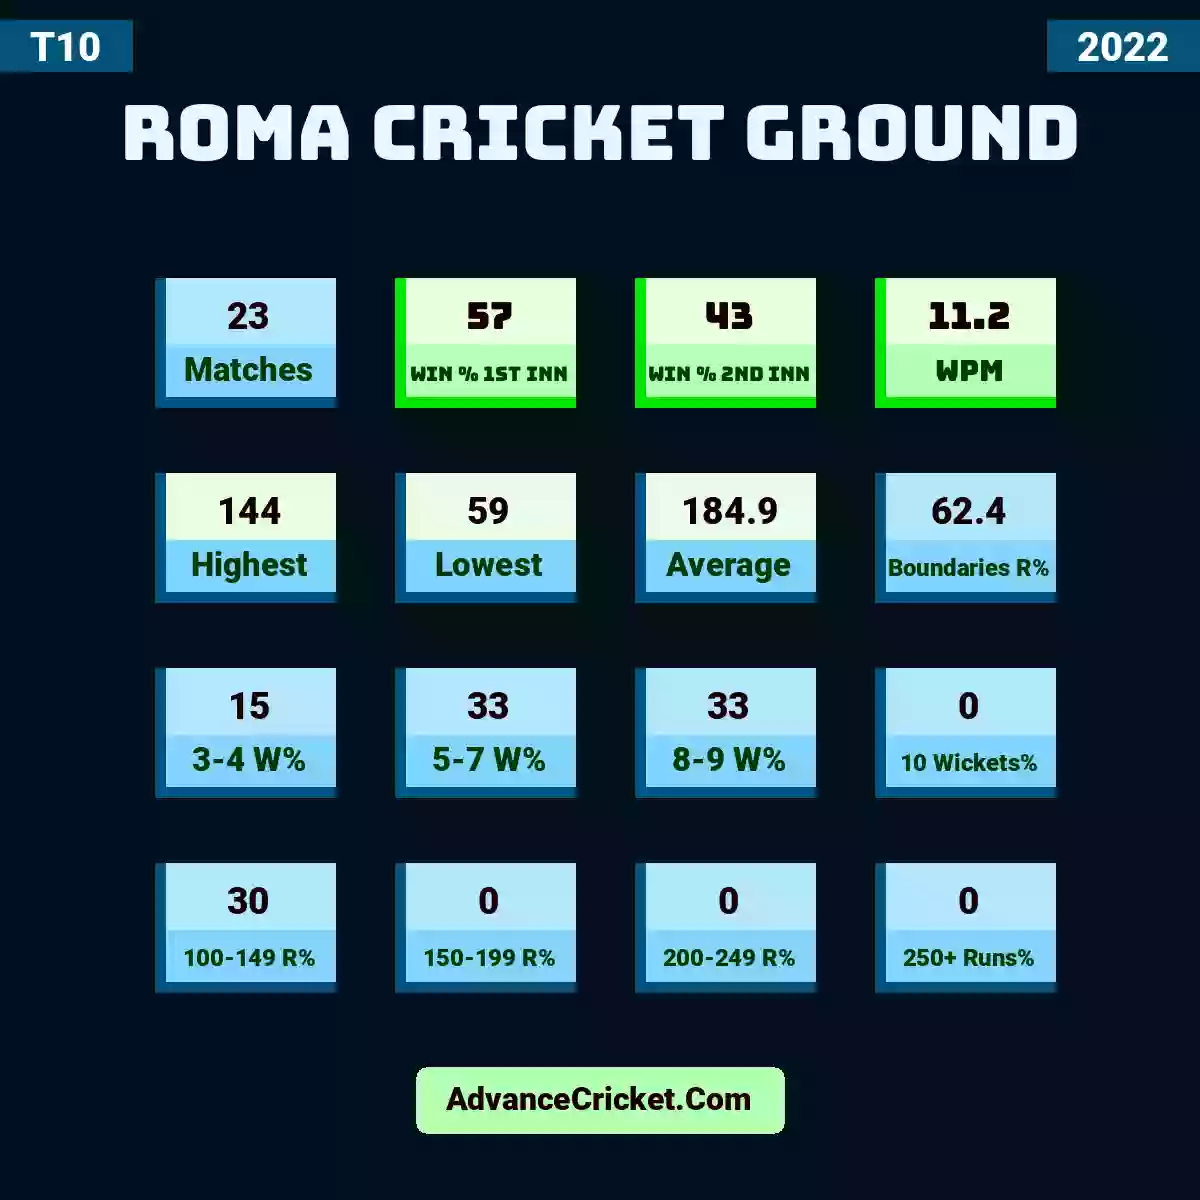 Image showing Roma Cricket Ground with Matches: 23, Win % 1st Inn: 57, Win % 2nd Inn: 43, WPM: 11.2, Highest: 144, Lowest: 59, Average: 184.9, Boundaries R%: 62.4, 3-4 W%: 15, 5-7 W%: 33, 8-9 W%: 33, 10 Wickets%: 0, 100-149 R%: 30, 150-199 R%: 0, 200-249 R%: 0, 250+ Runs%: 0.